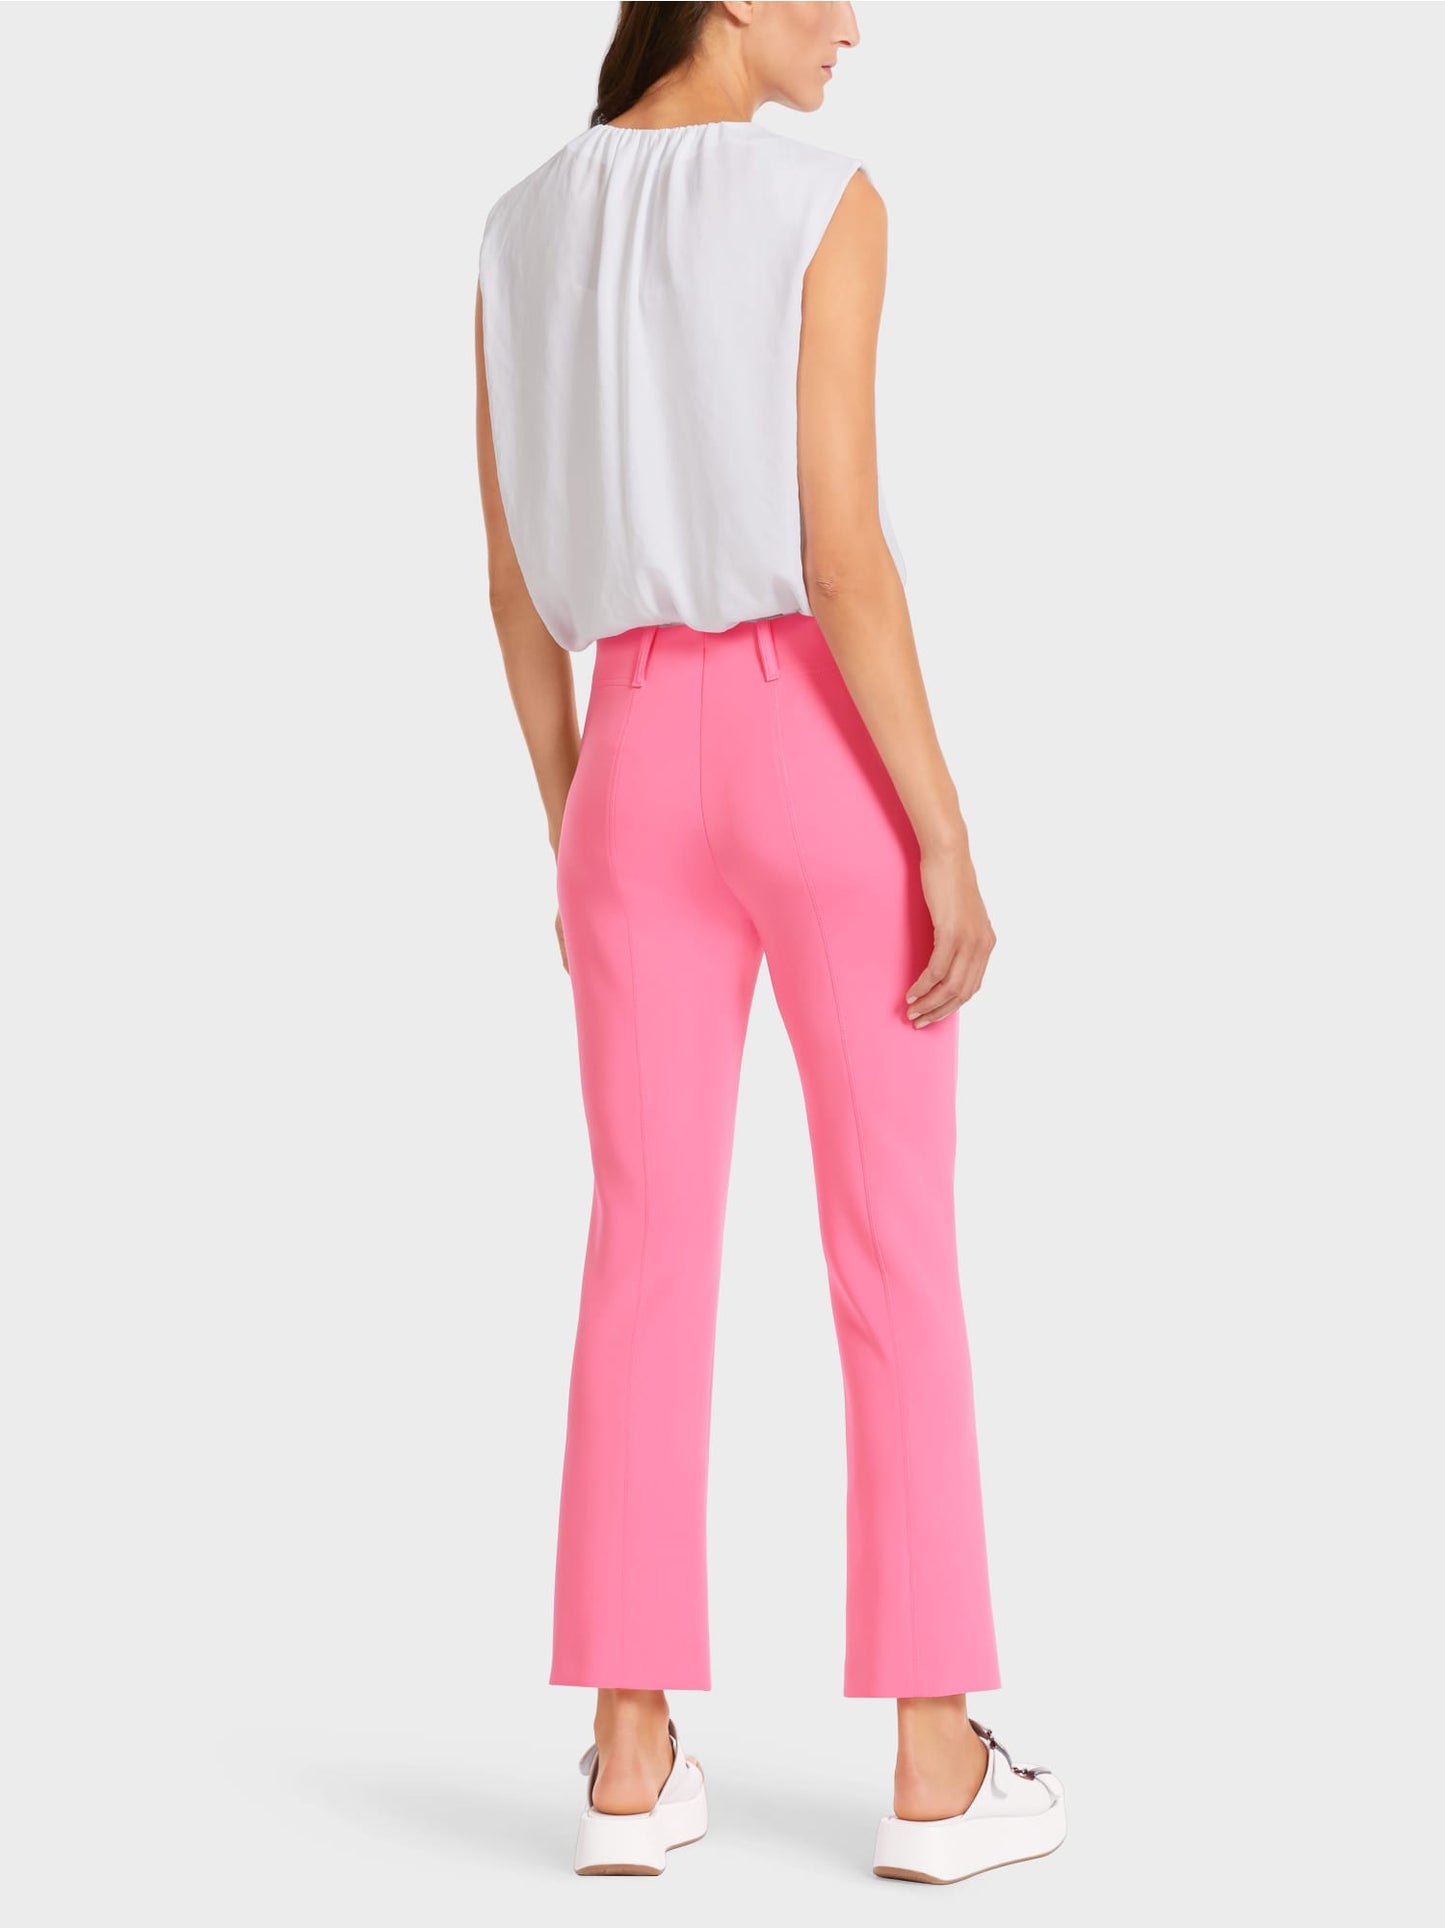 Classic Pants with Pressed Creases - SALE